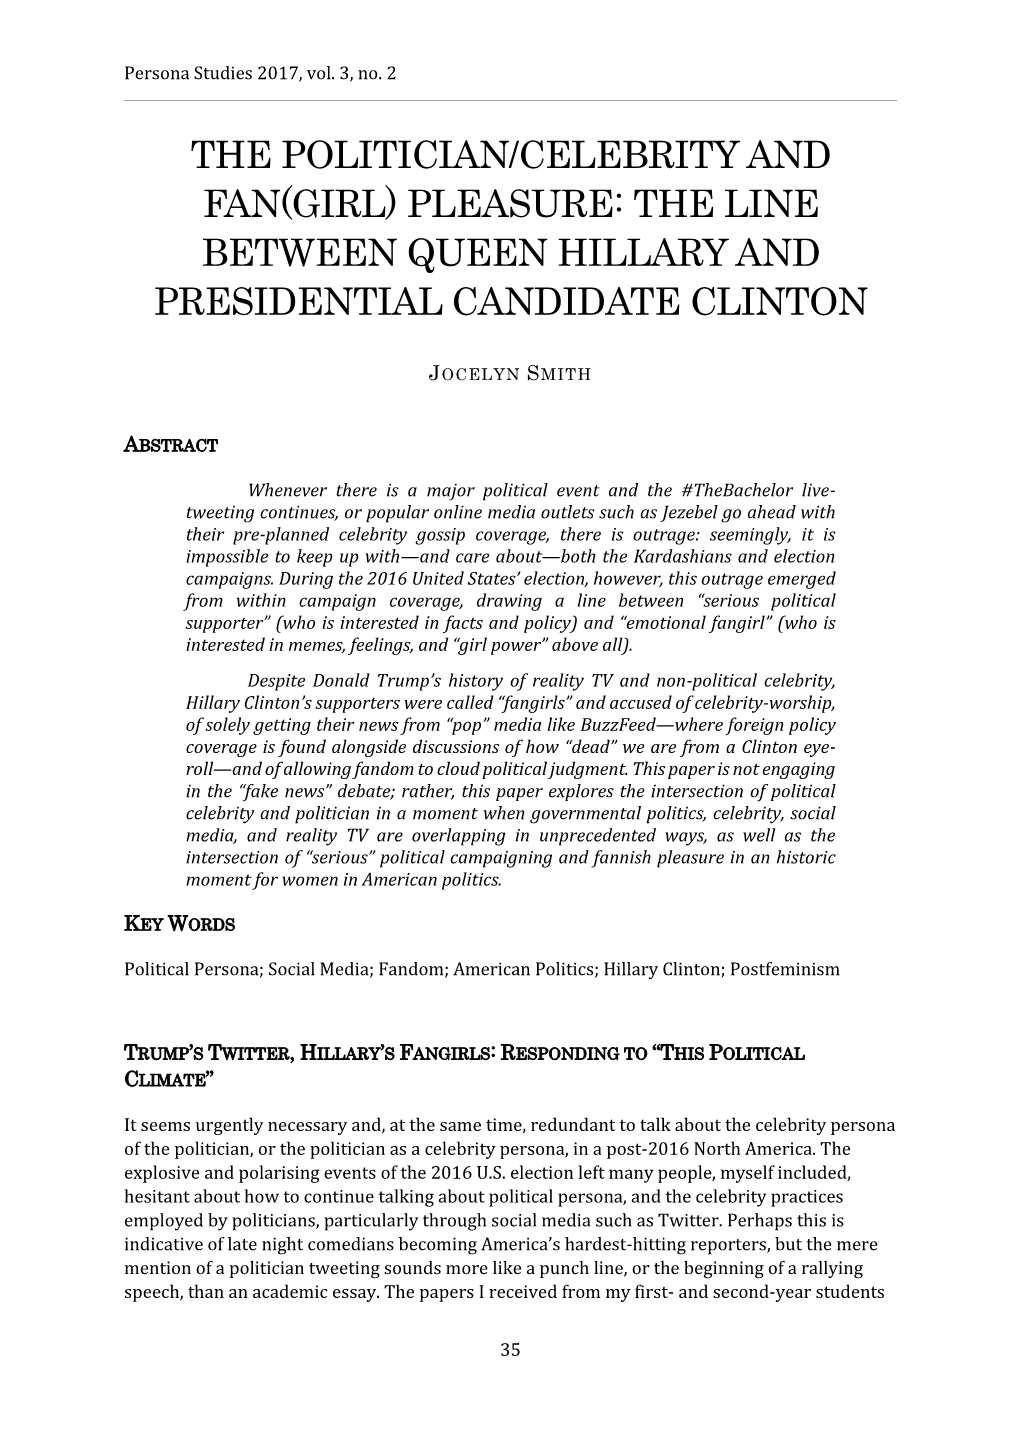 The Line Between Queen Hillary and Presidential Candidate Clinton